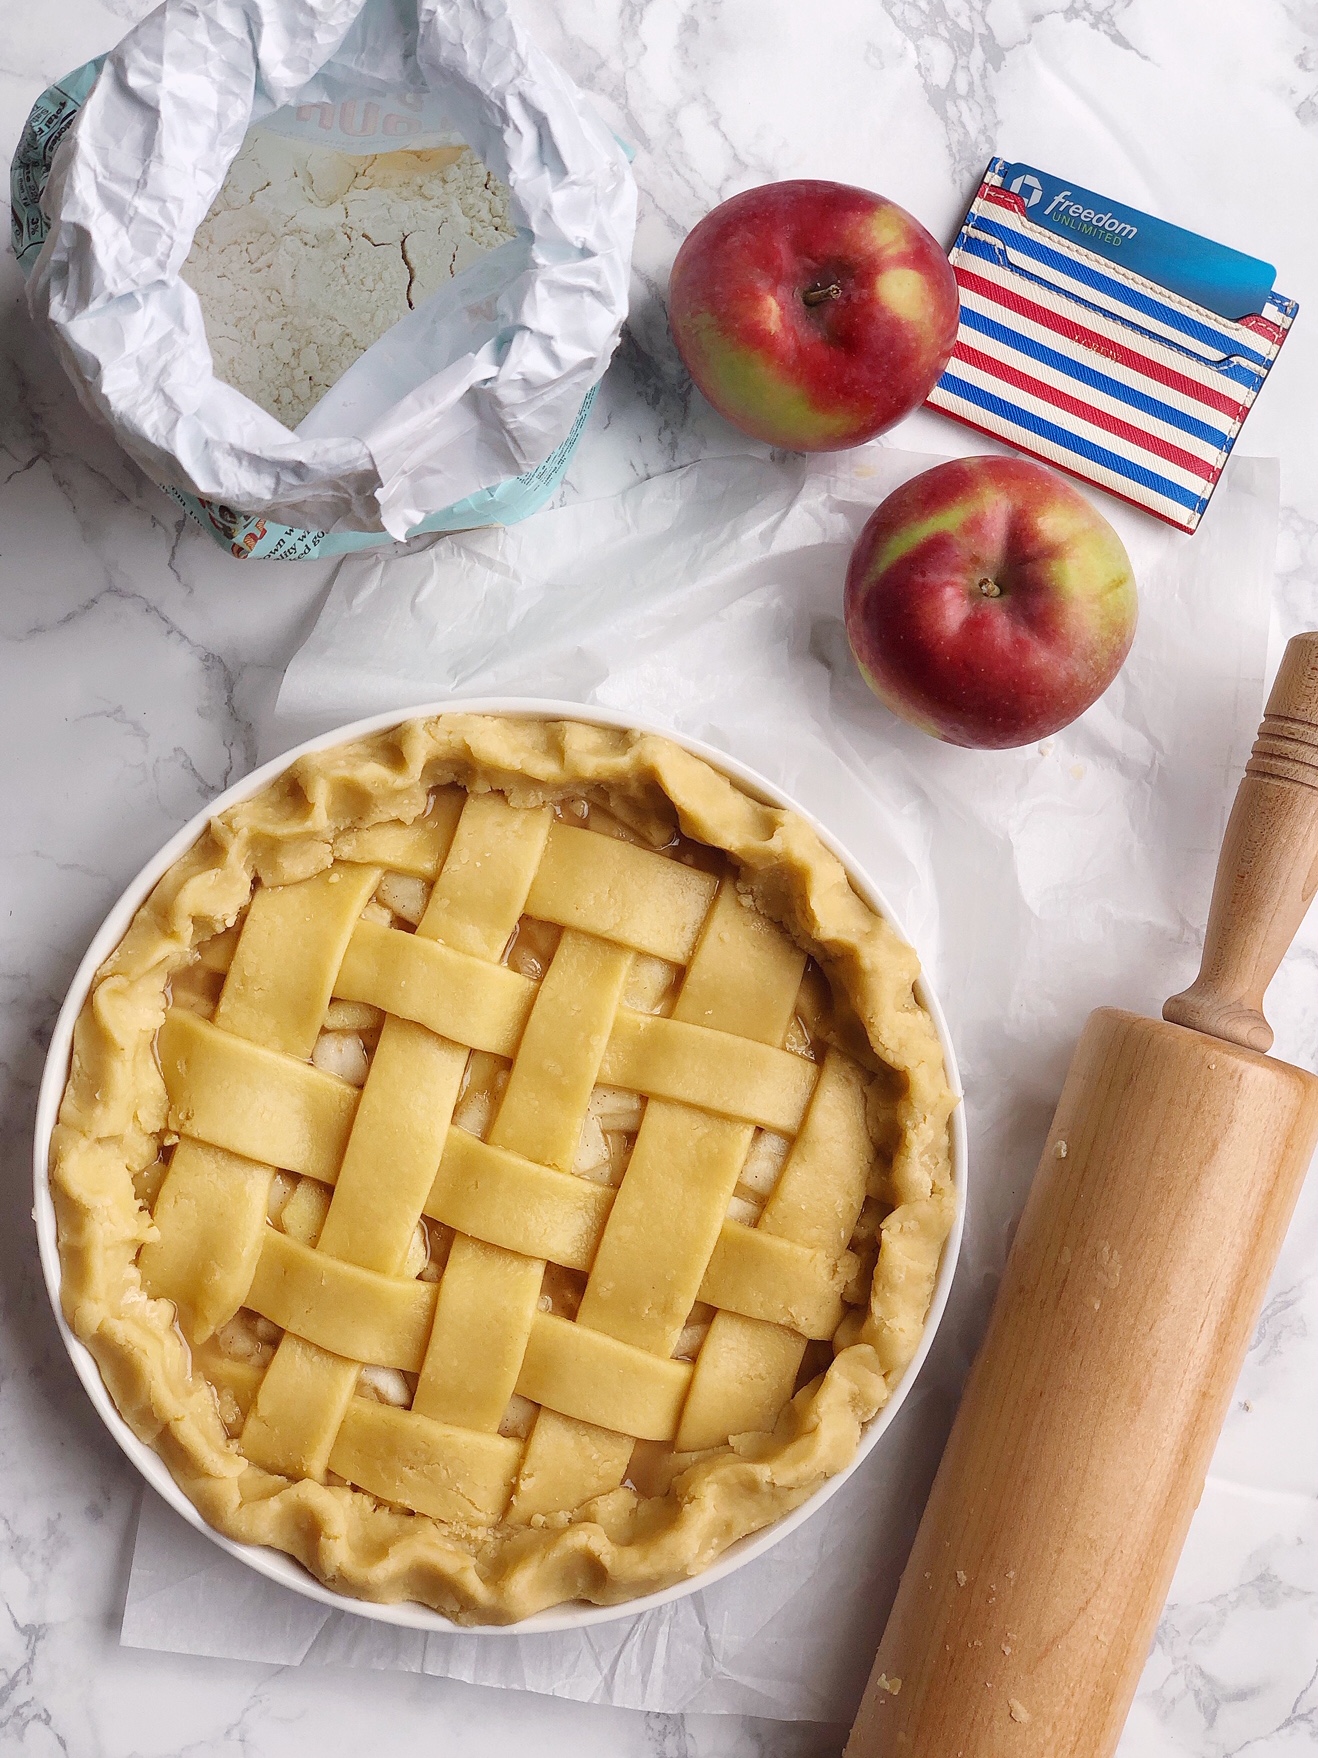 apple-pie-baking-with-chase-freedom-unlimited-cash-back-credit-card